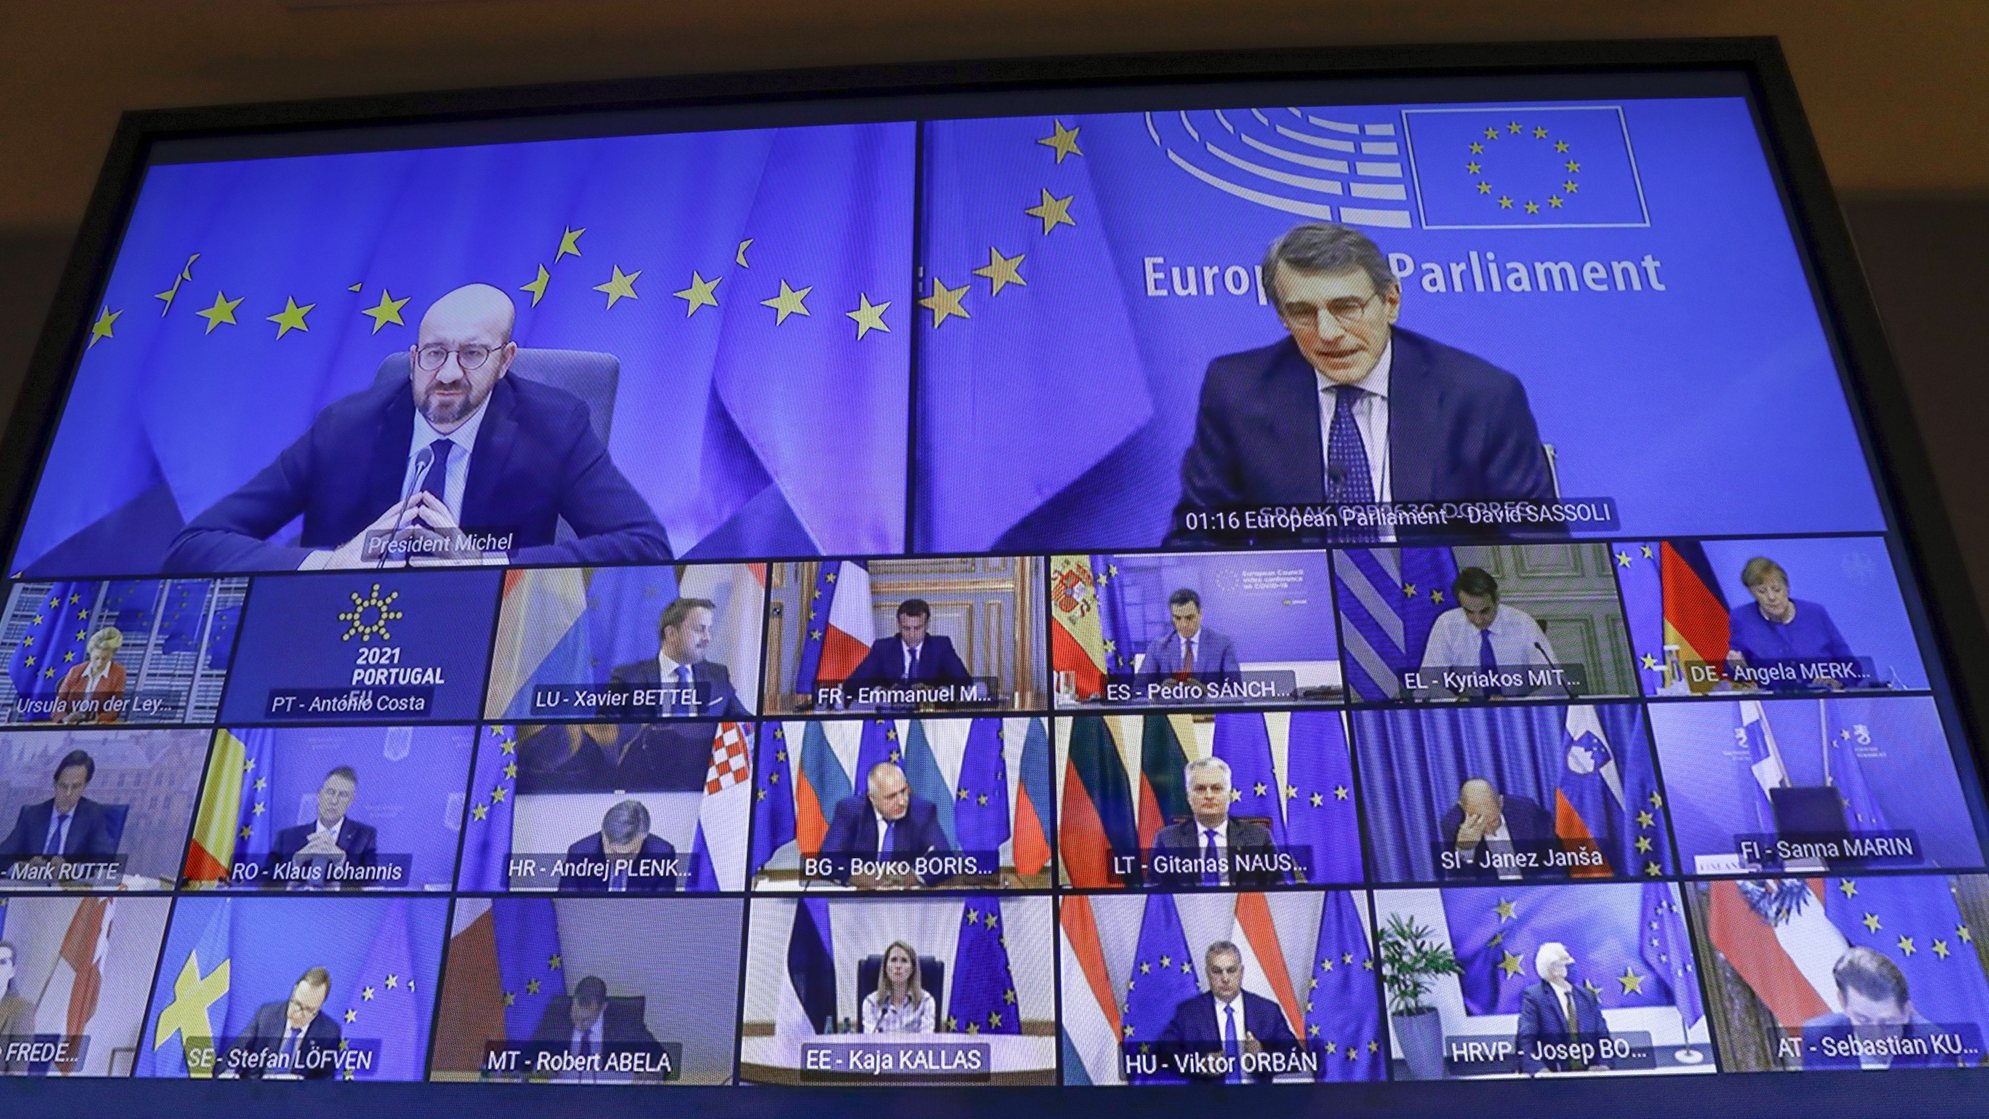 epa09035706 European Council President Charles Michel and European Parliament President David Sassoli with other EU leaders on screen at the start of a EU Council two-days video conference on the COVID-19 pandemic, in Brussels, Belgium, 25 February 2021. EU leaders will take stock of the epidemiological situation. They will continue working to coordinate the response to the COVID-19 pandemic, focusing in particular on the authorisation, production and distribution of vaccines and the movement of persons.  EPA/OLIVIER HOSLET / POOL